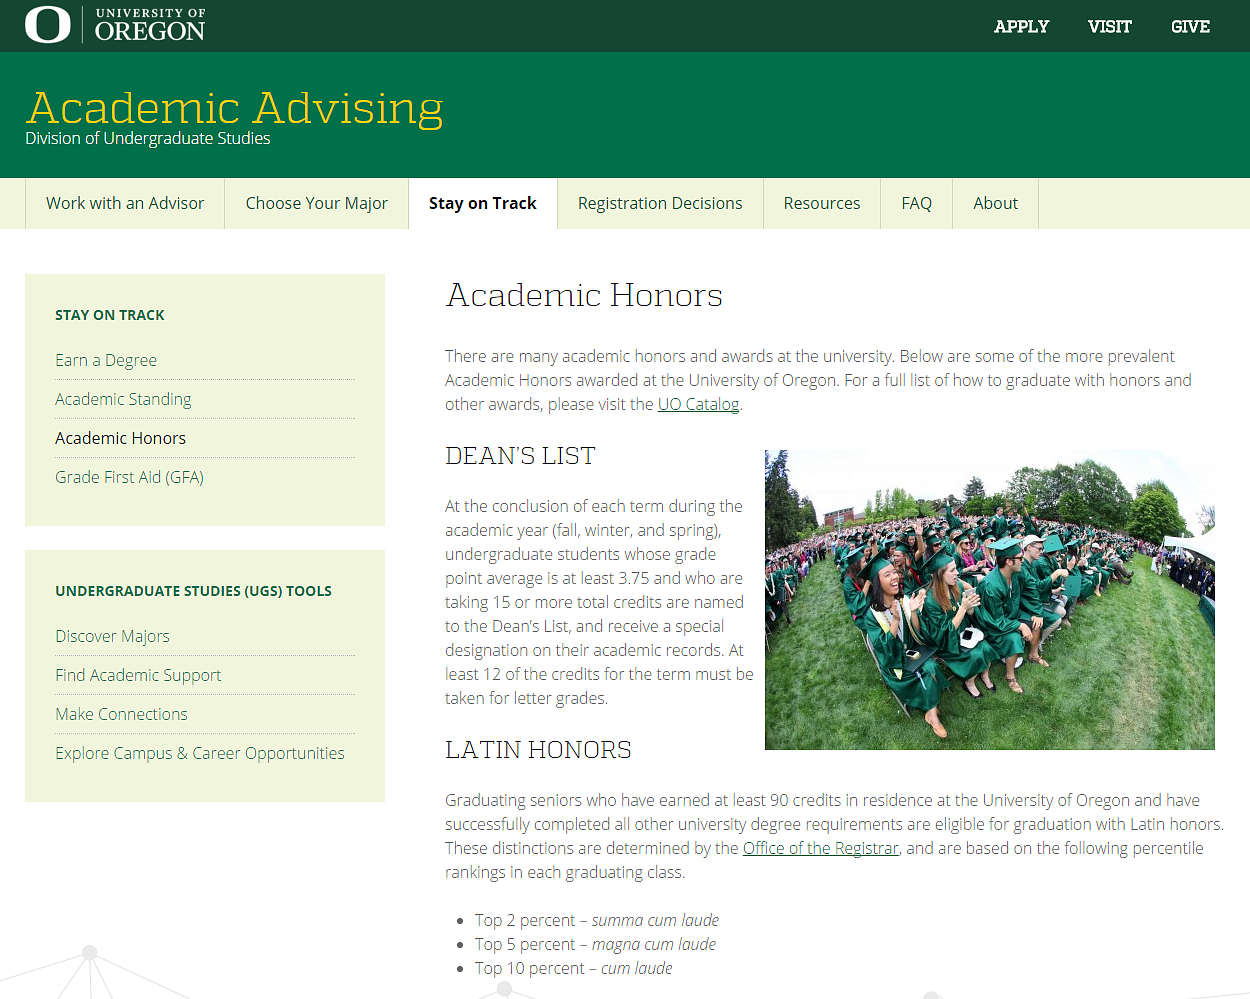 Screenshot of the Academic Advising Academic Honors page